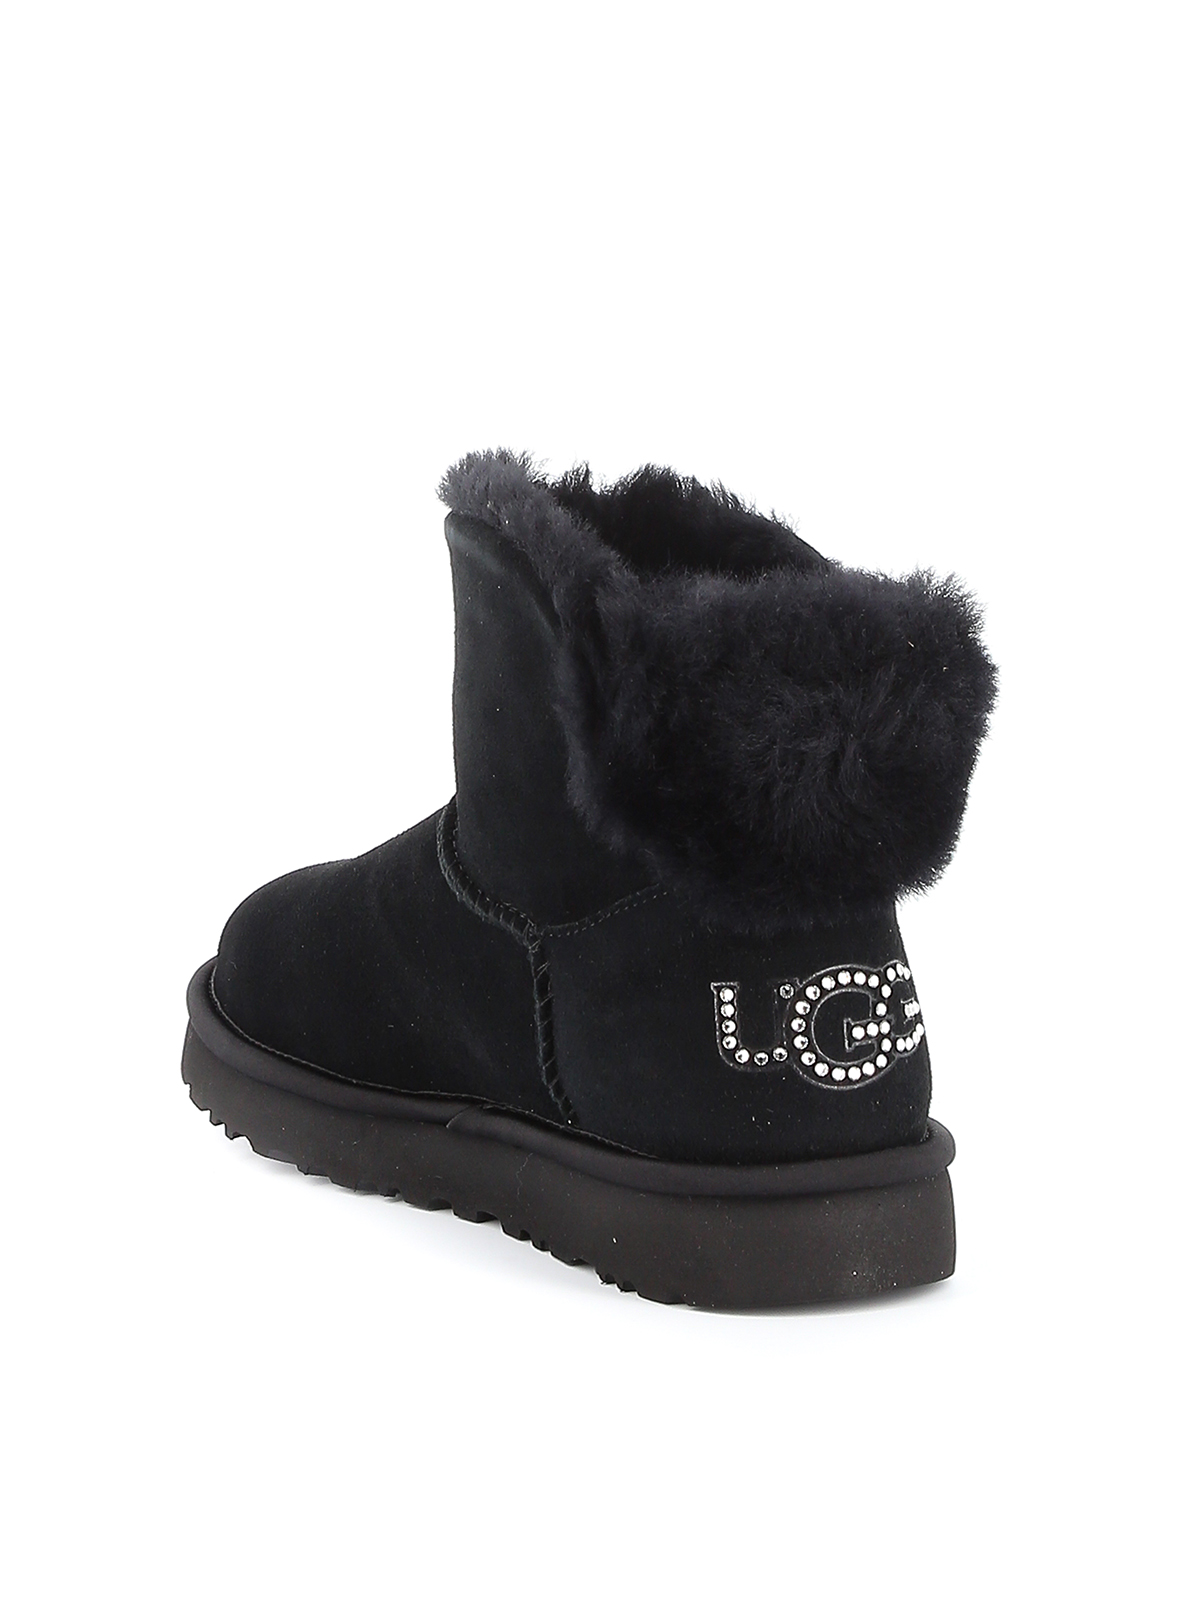 ugg bling boots